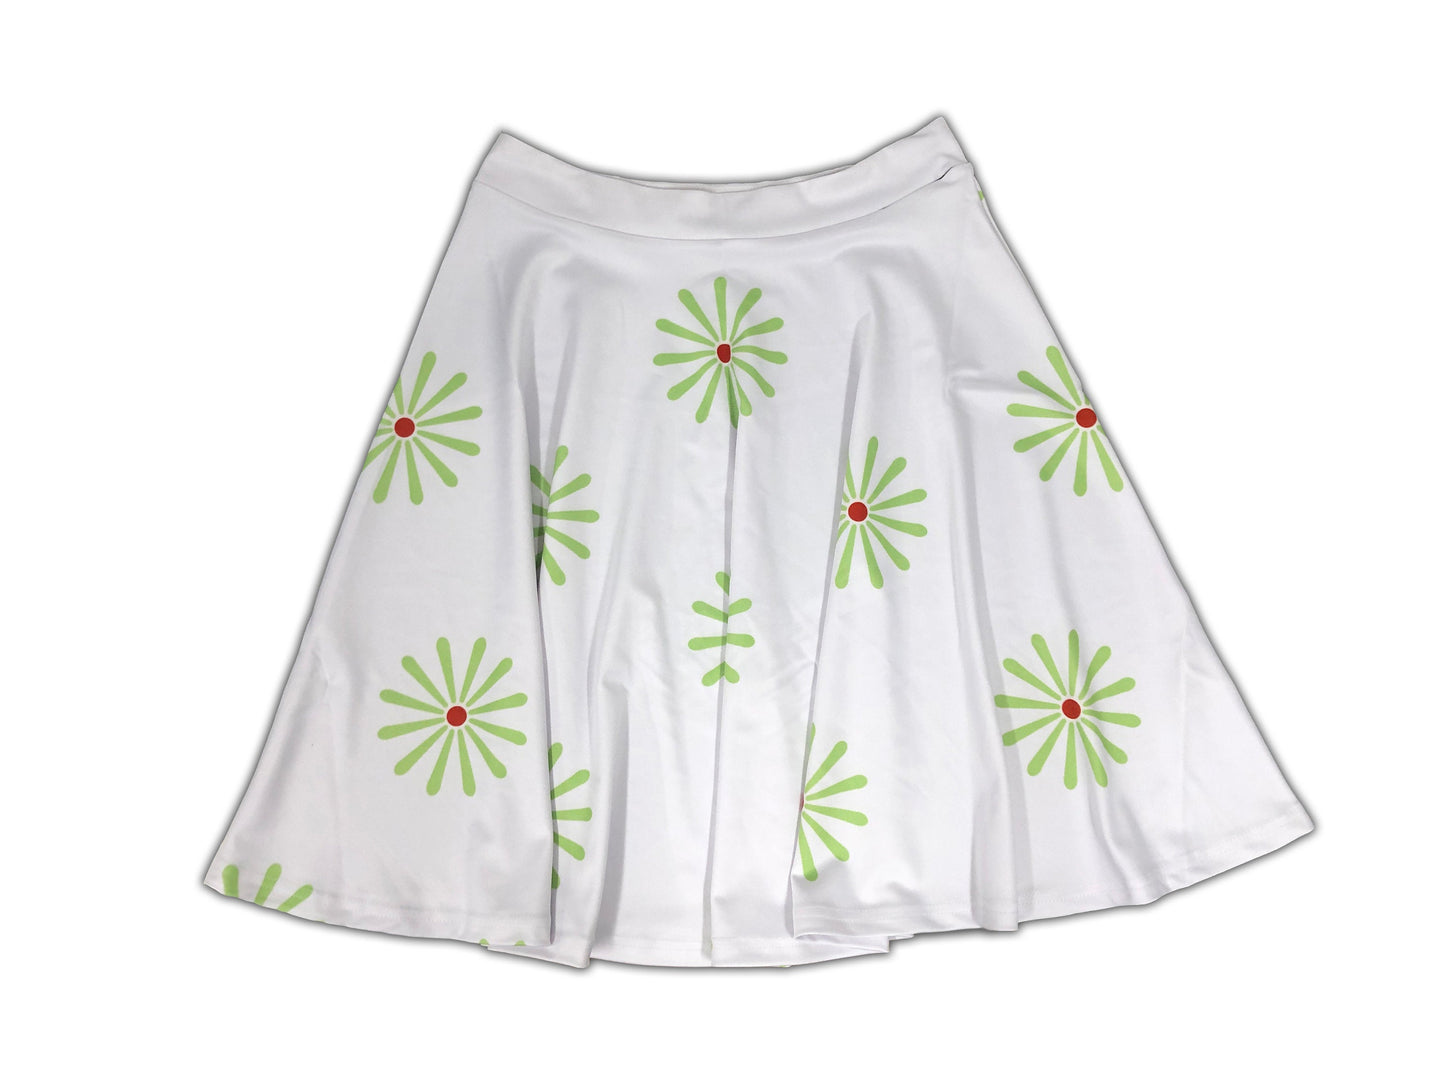 Haunted Mansion Tightrope Walker Inspired High Waisted Skirt